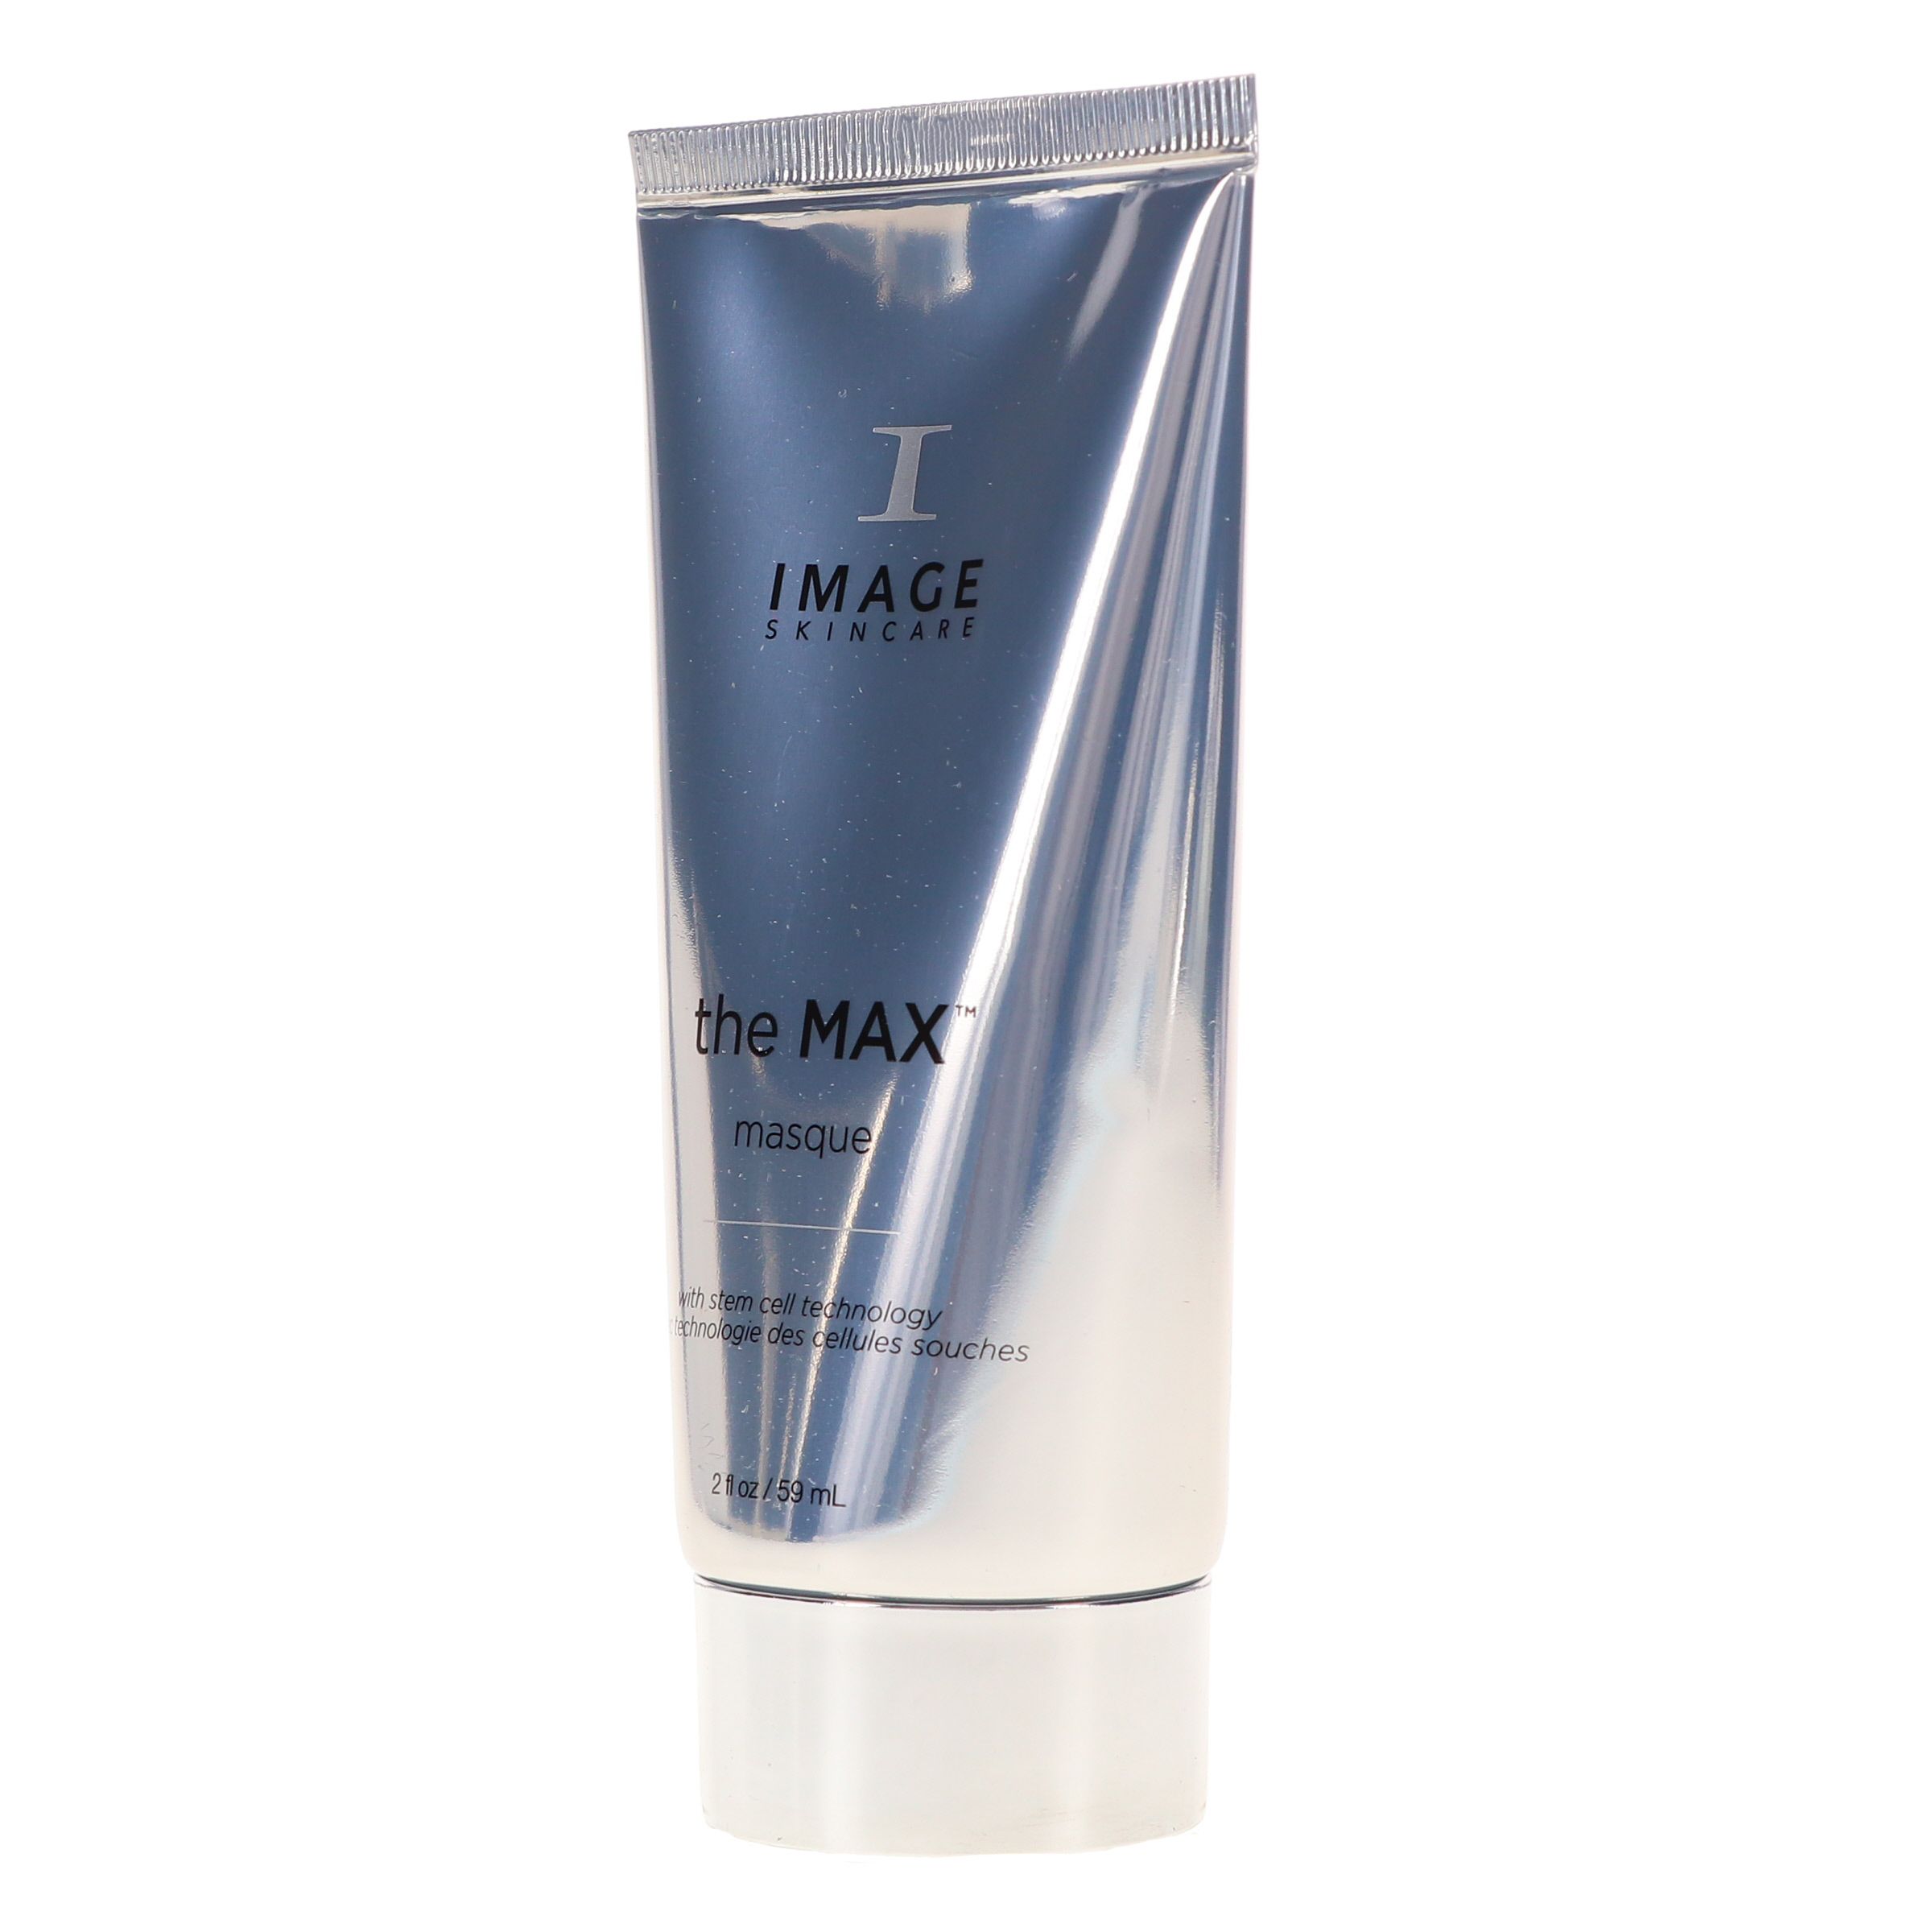 IMAGE Skincare The MAX Stem Cell Masque 2 oz - image 2 of 8